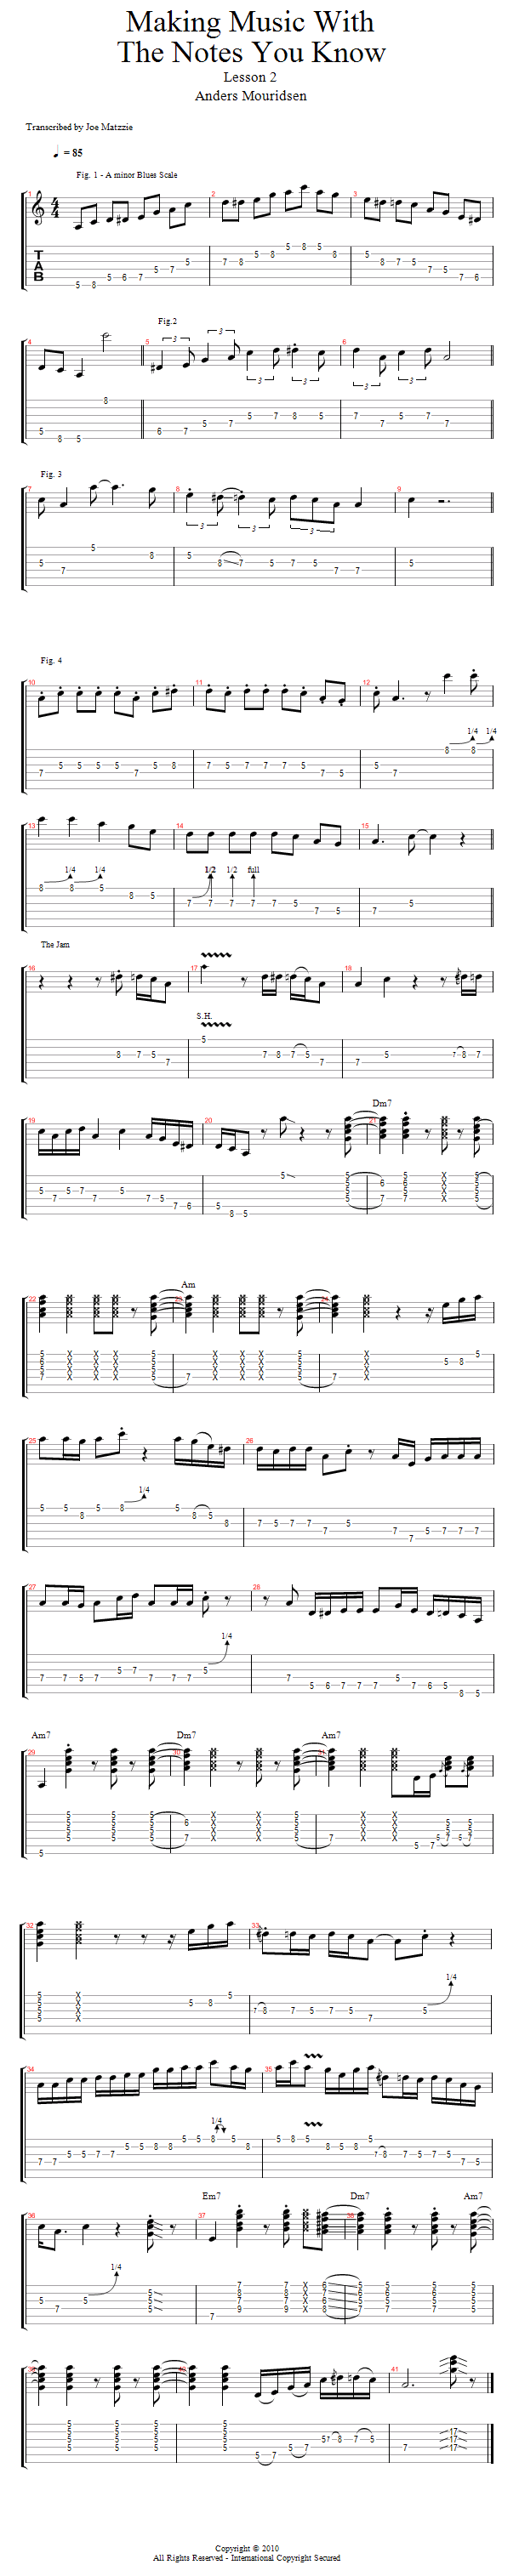 The Good Ol' Familiar Pattern song notation